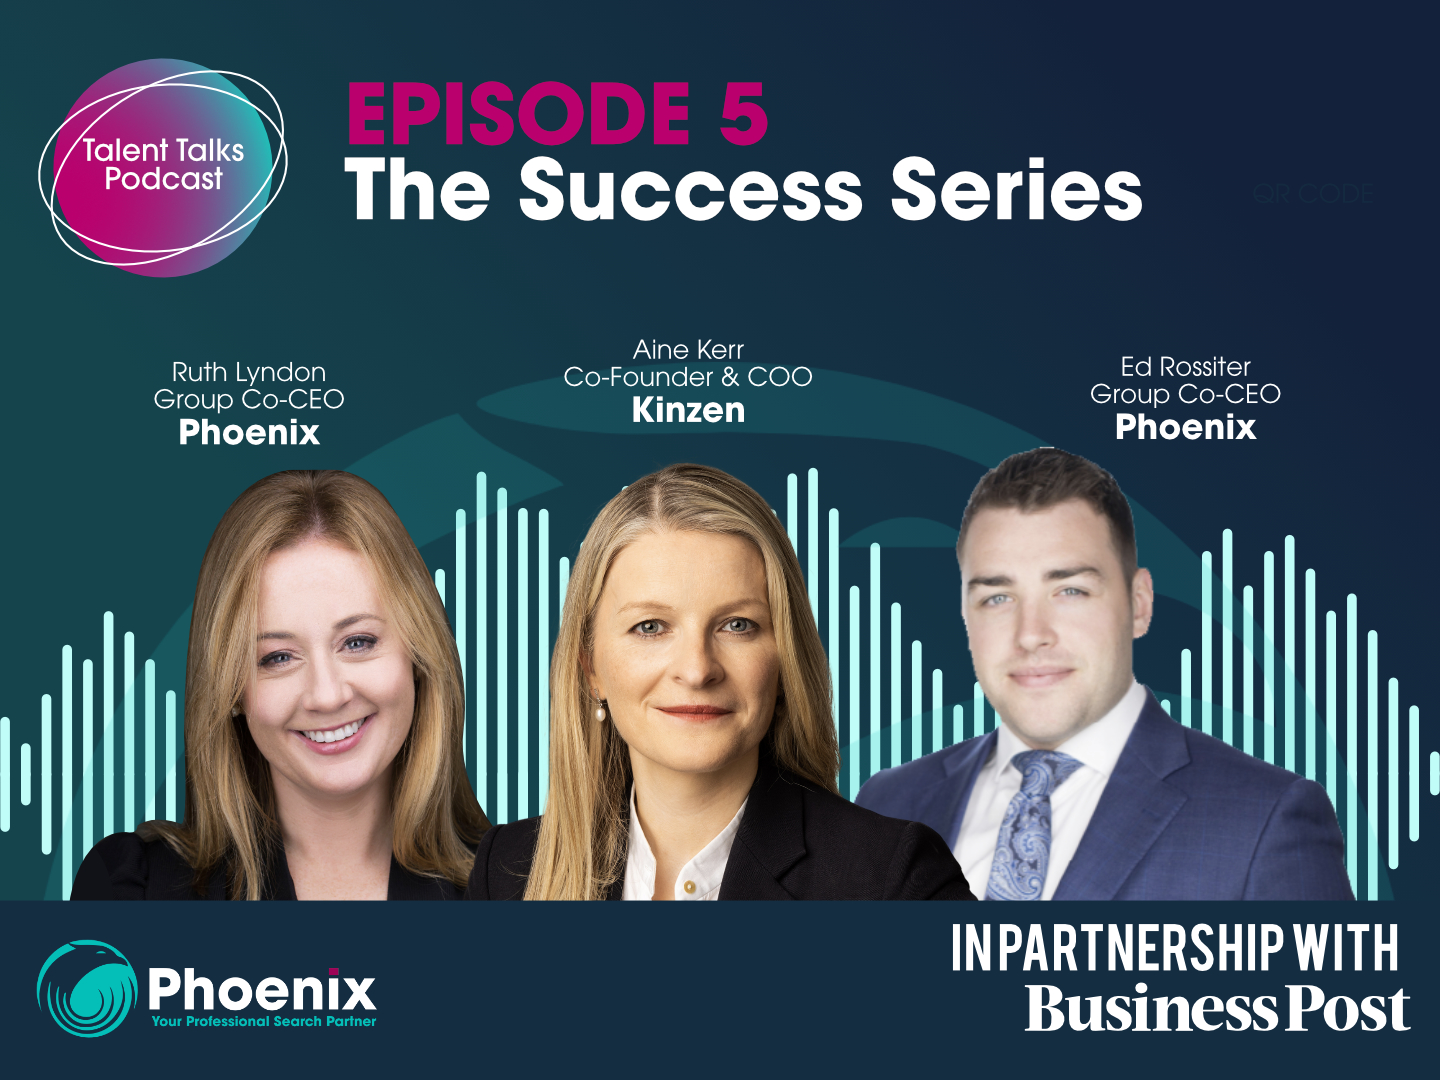 The Success Series Episode 5: Aine Kerr, Co-Founder & COO of Kinzen 